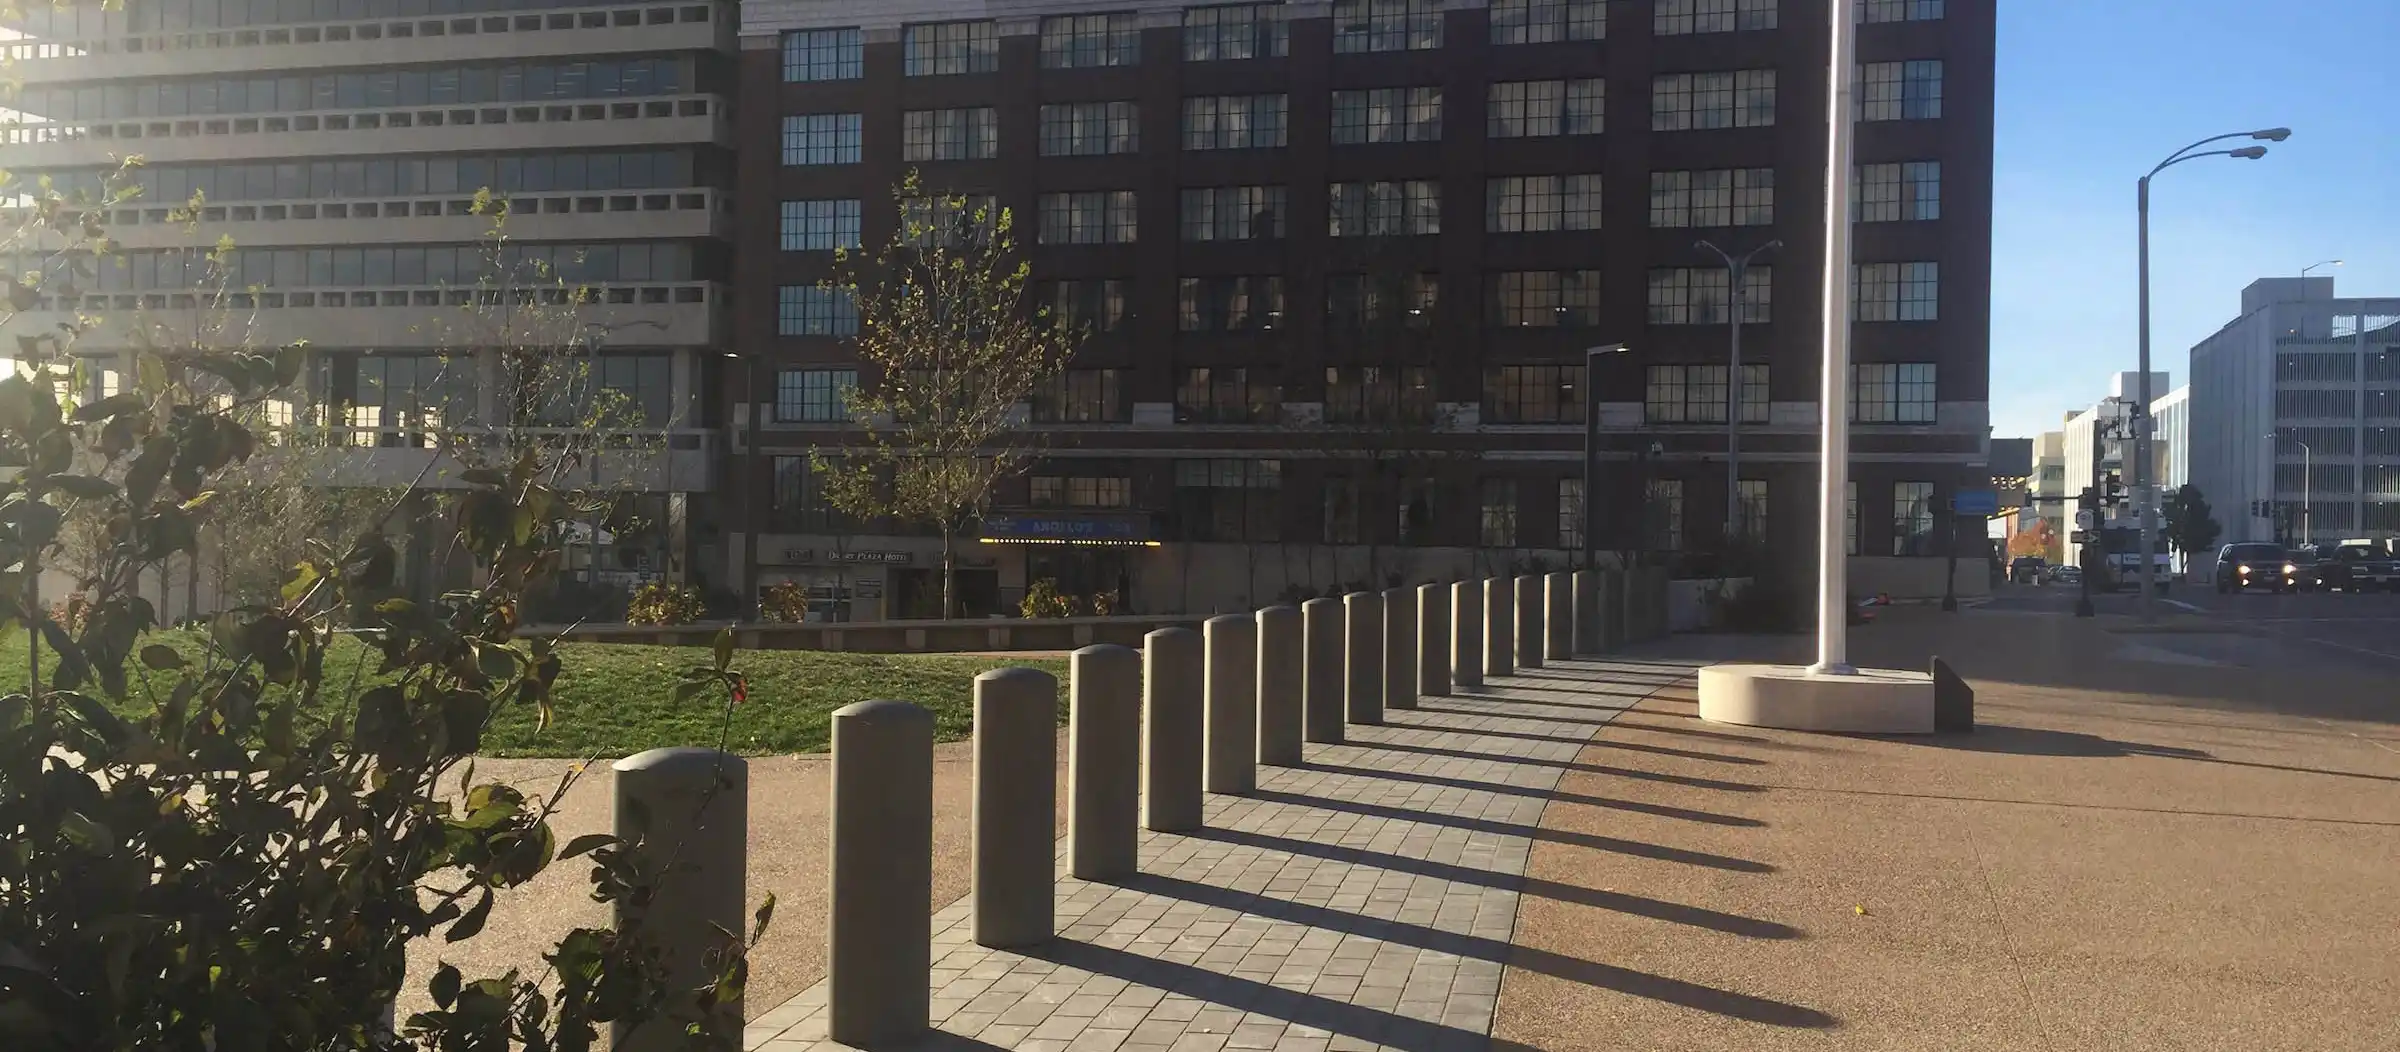 A Delta Scientific security installation outside a commercial building, featuring a row of durable bollards neatly aligned along the pathway, integrating seamlessly with the urban landscape while providing effective perimeter protection.